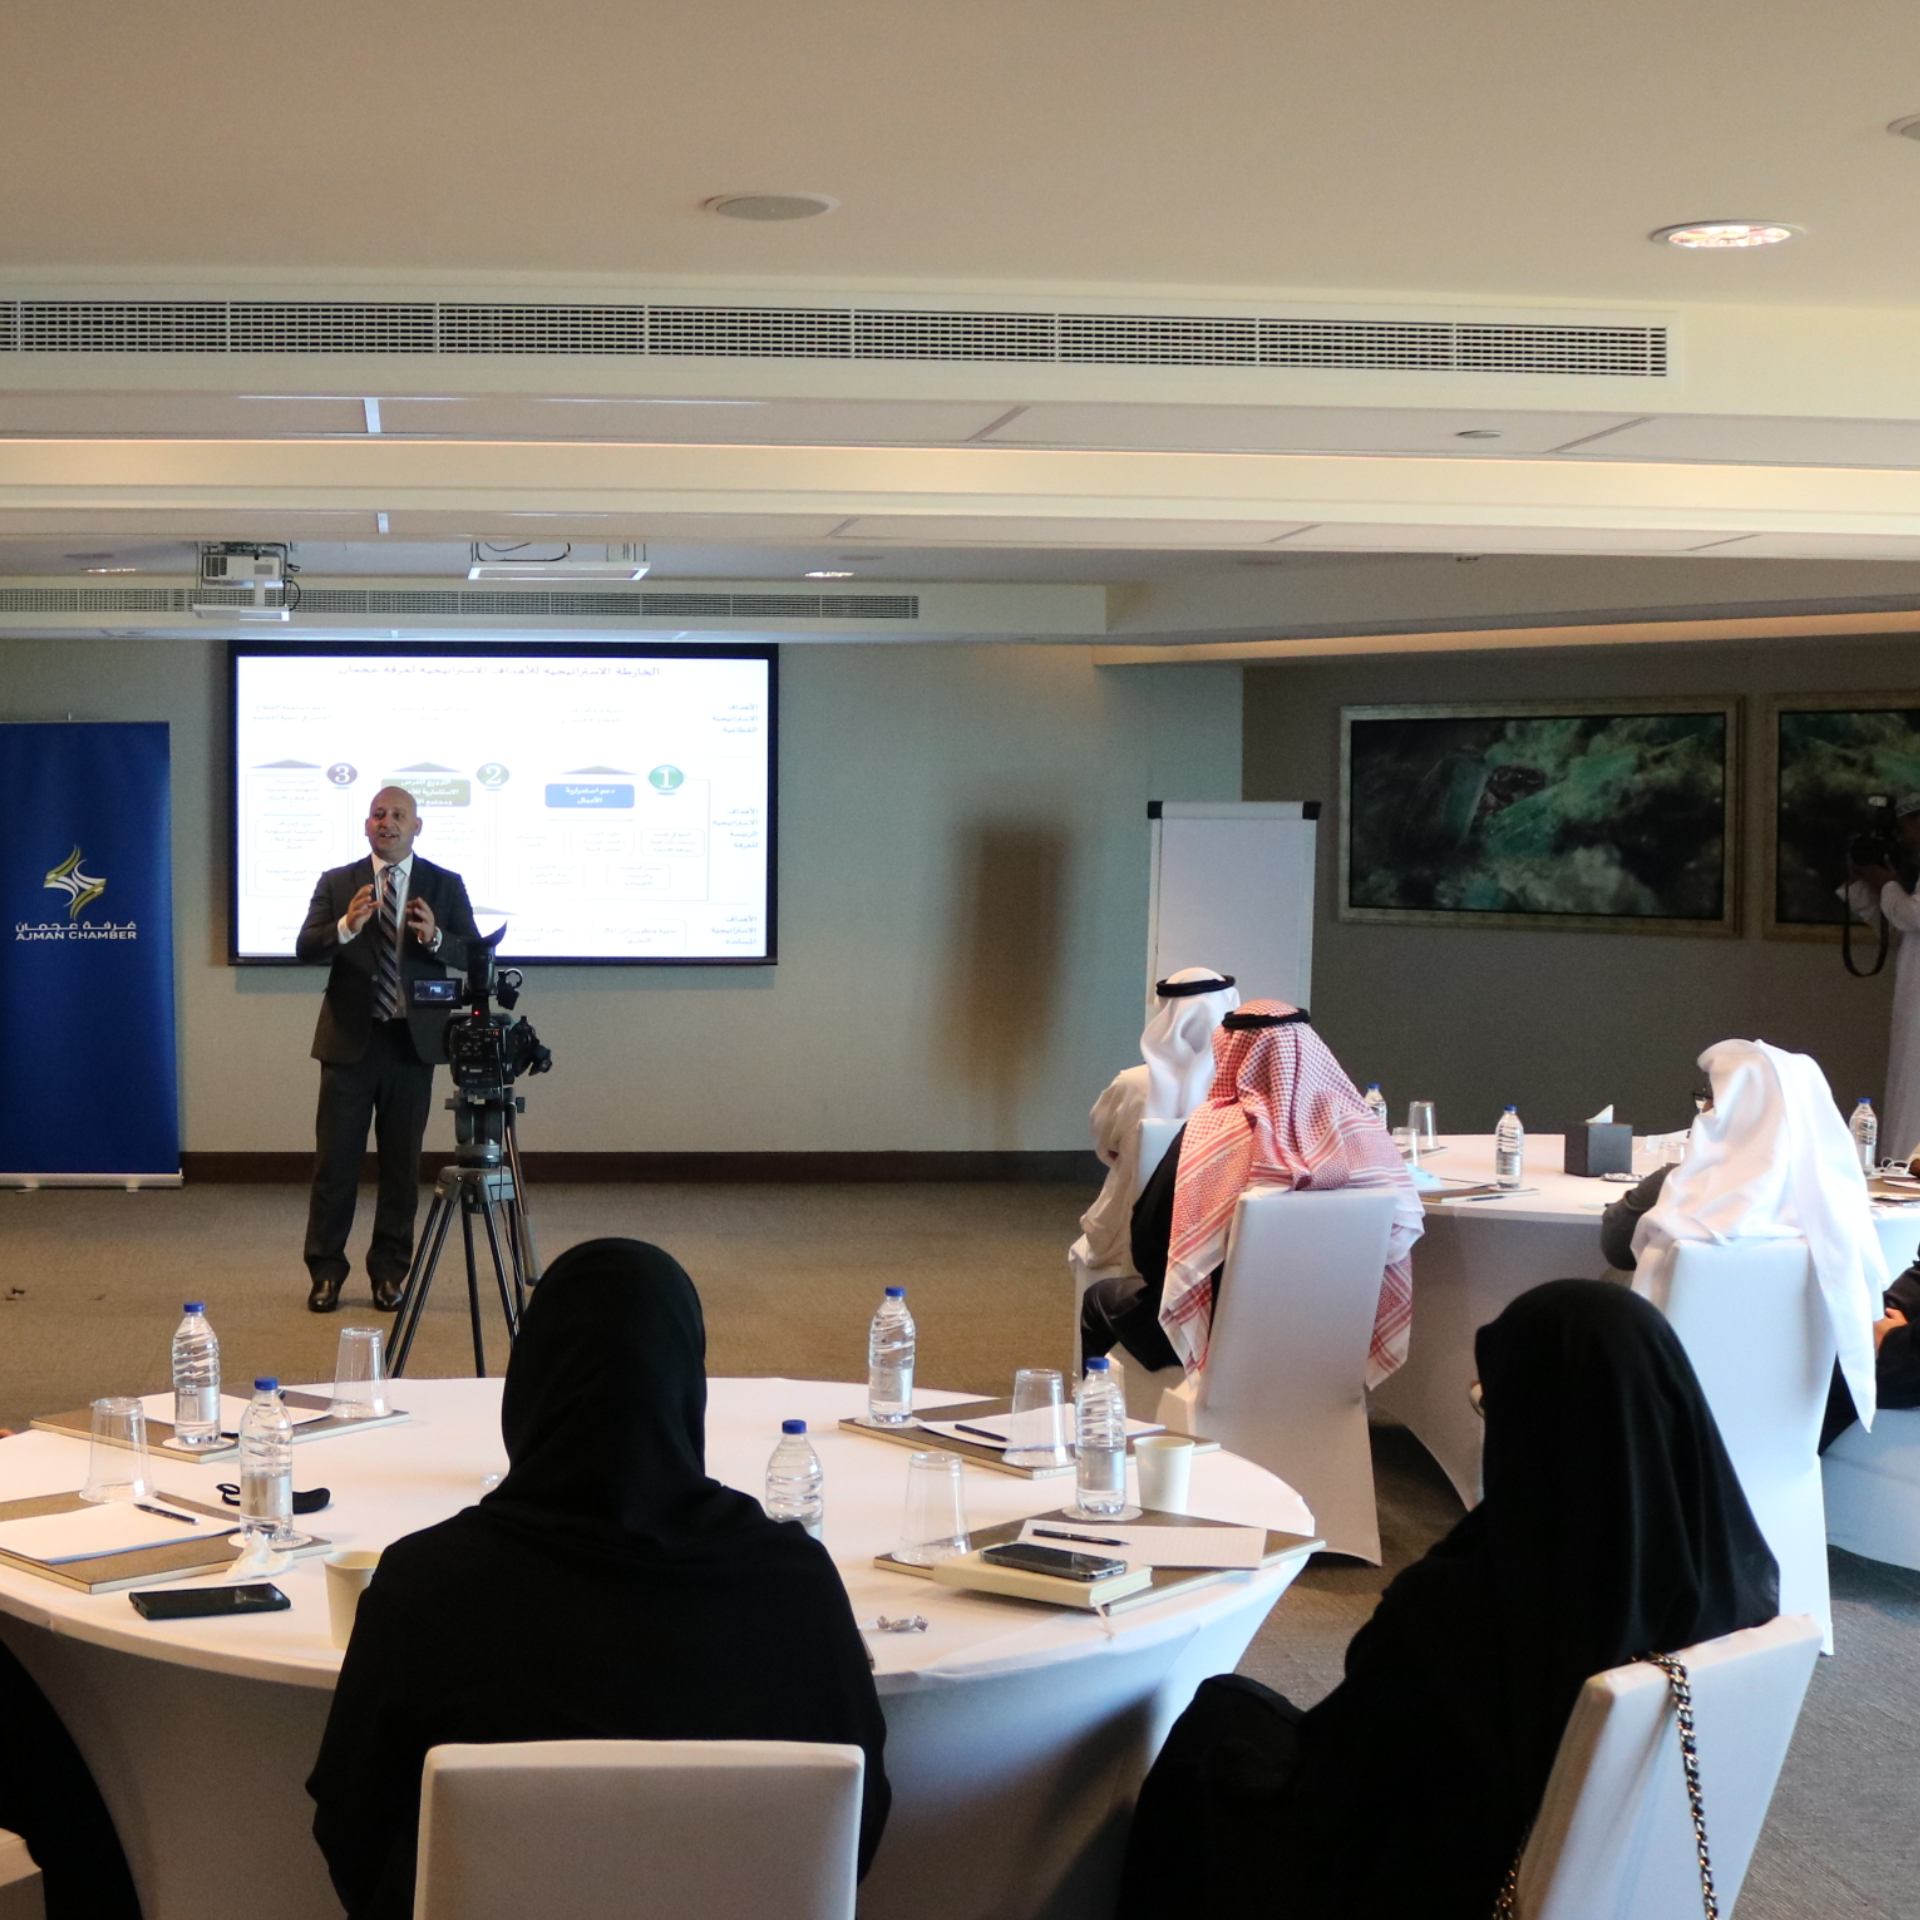 Ajman Chamber Launches The "Institutional Capacity Development Program" For Its Employees By Providing Twenty-Five Workshops